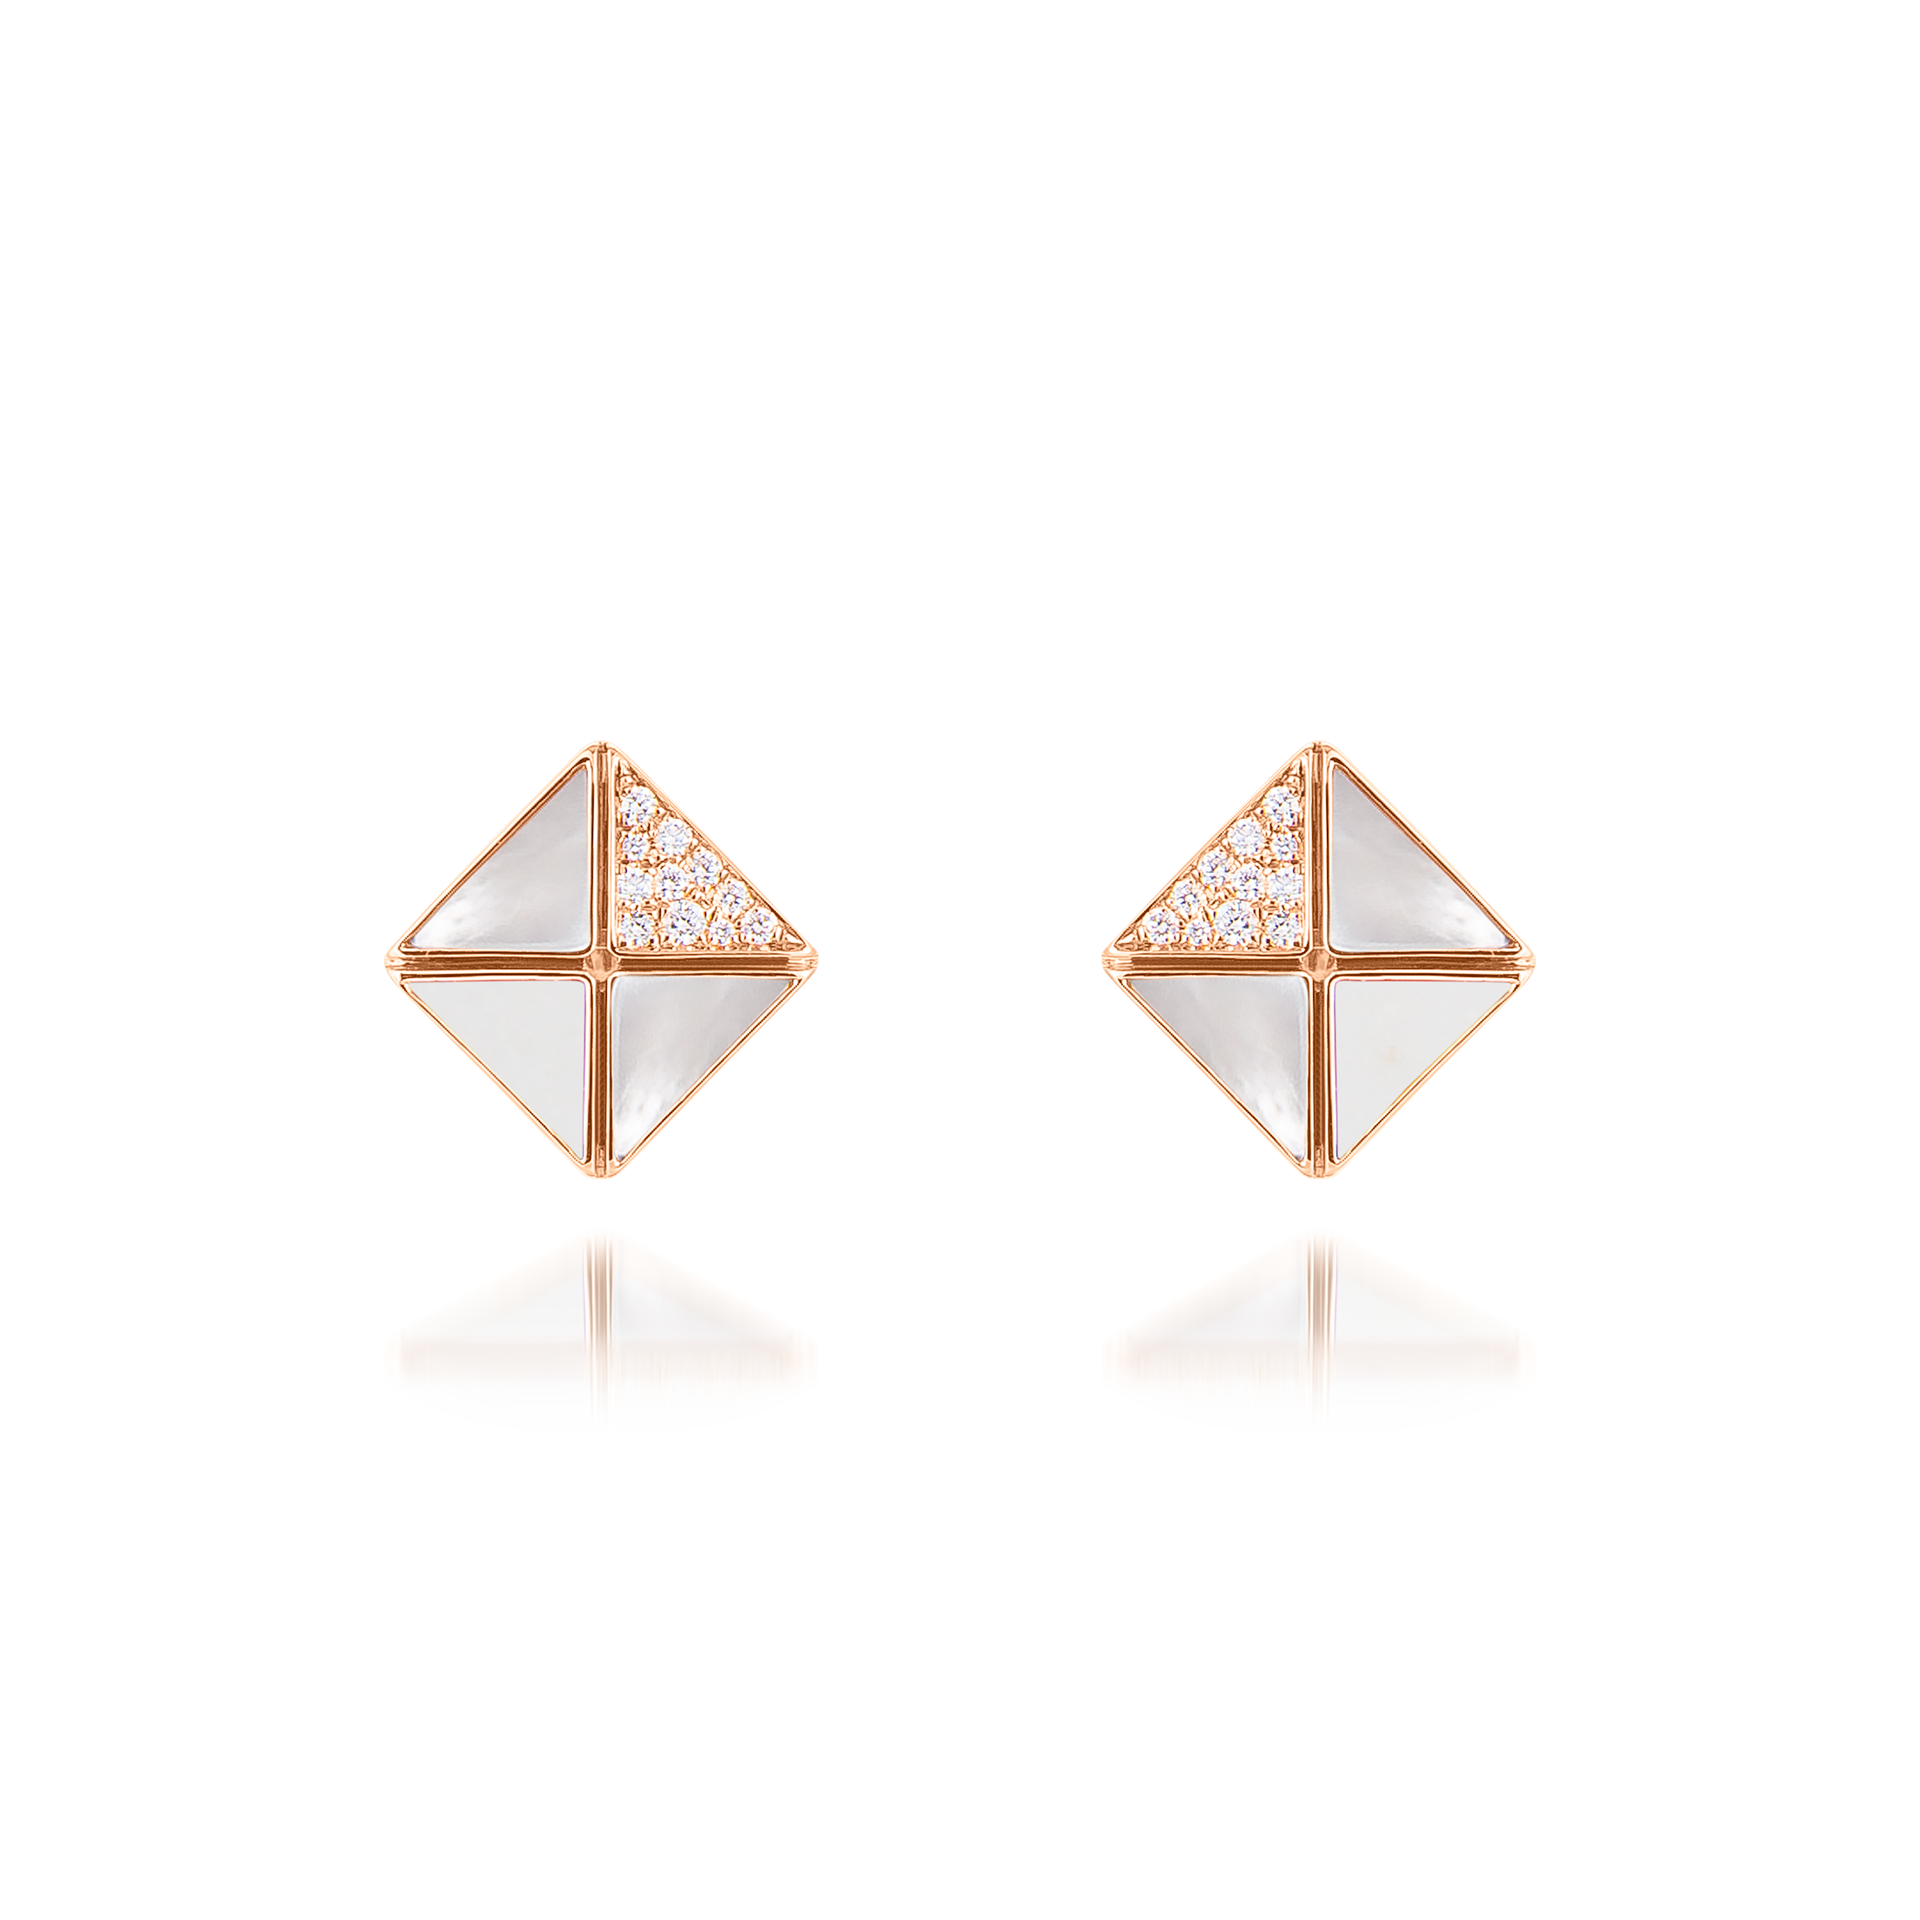 Deco Quadratic Studs with White Agate, White Mother of Pearl and Diamonds  In 18K Rose Gold